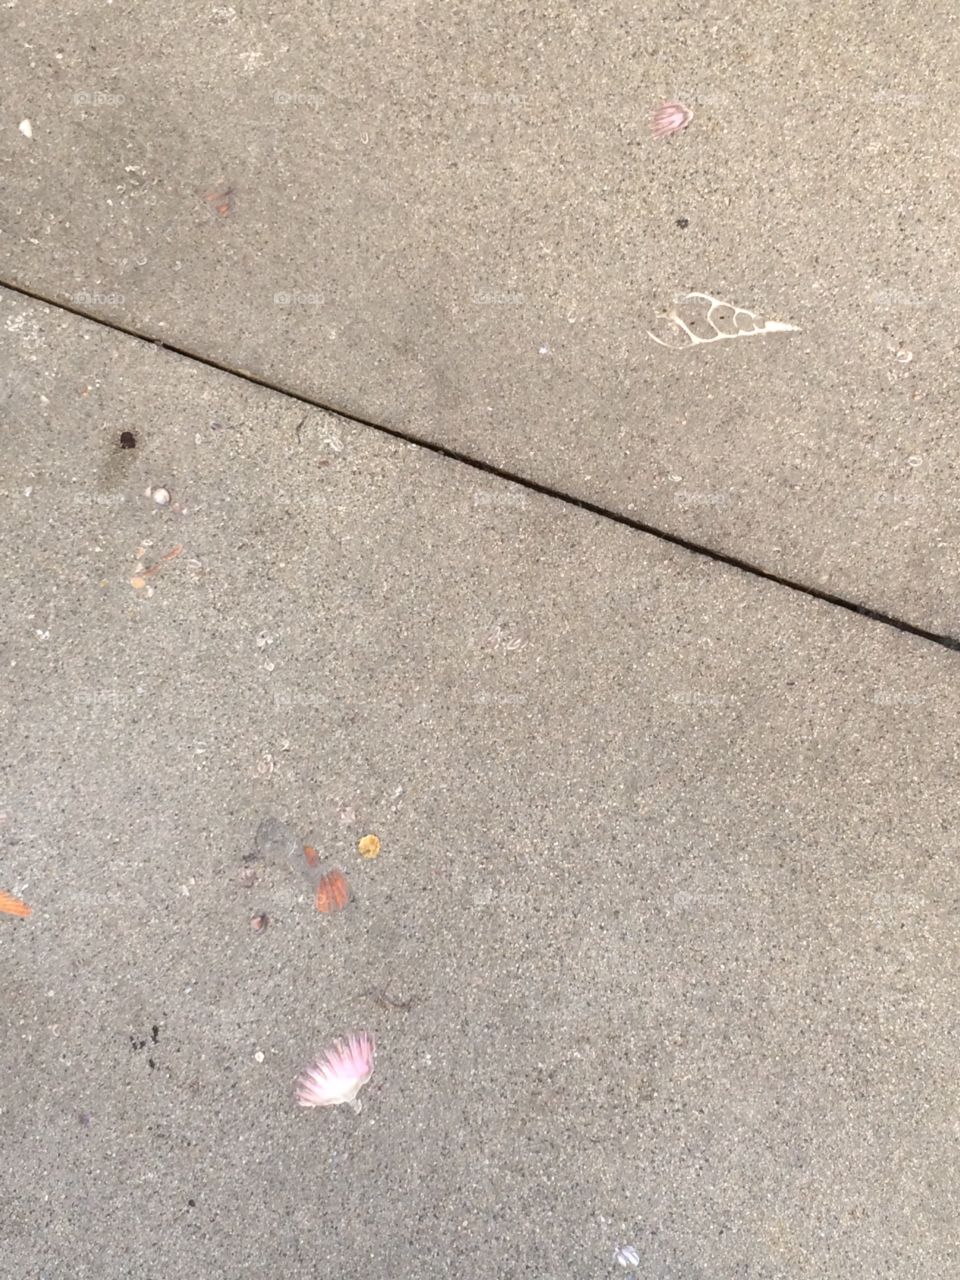 Shells in cement path 